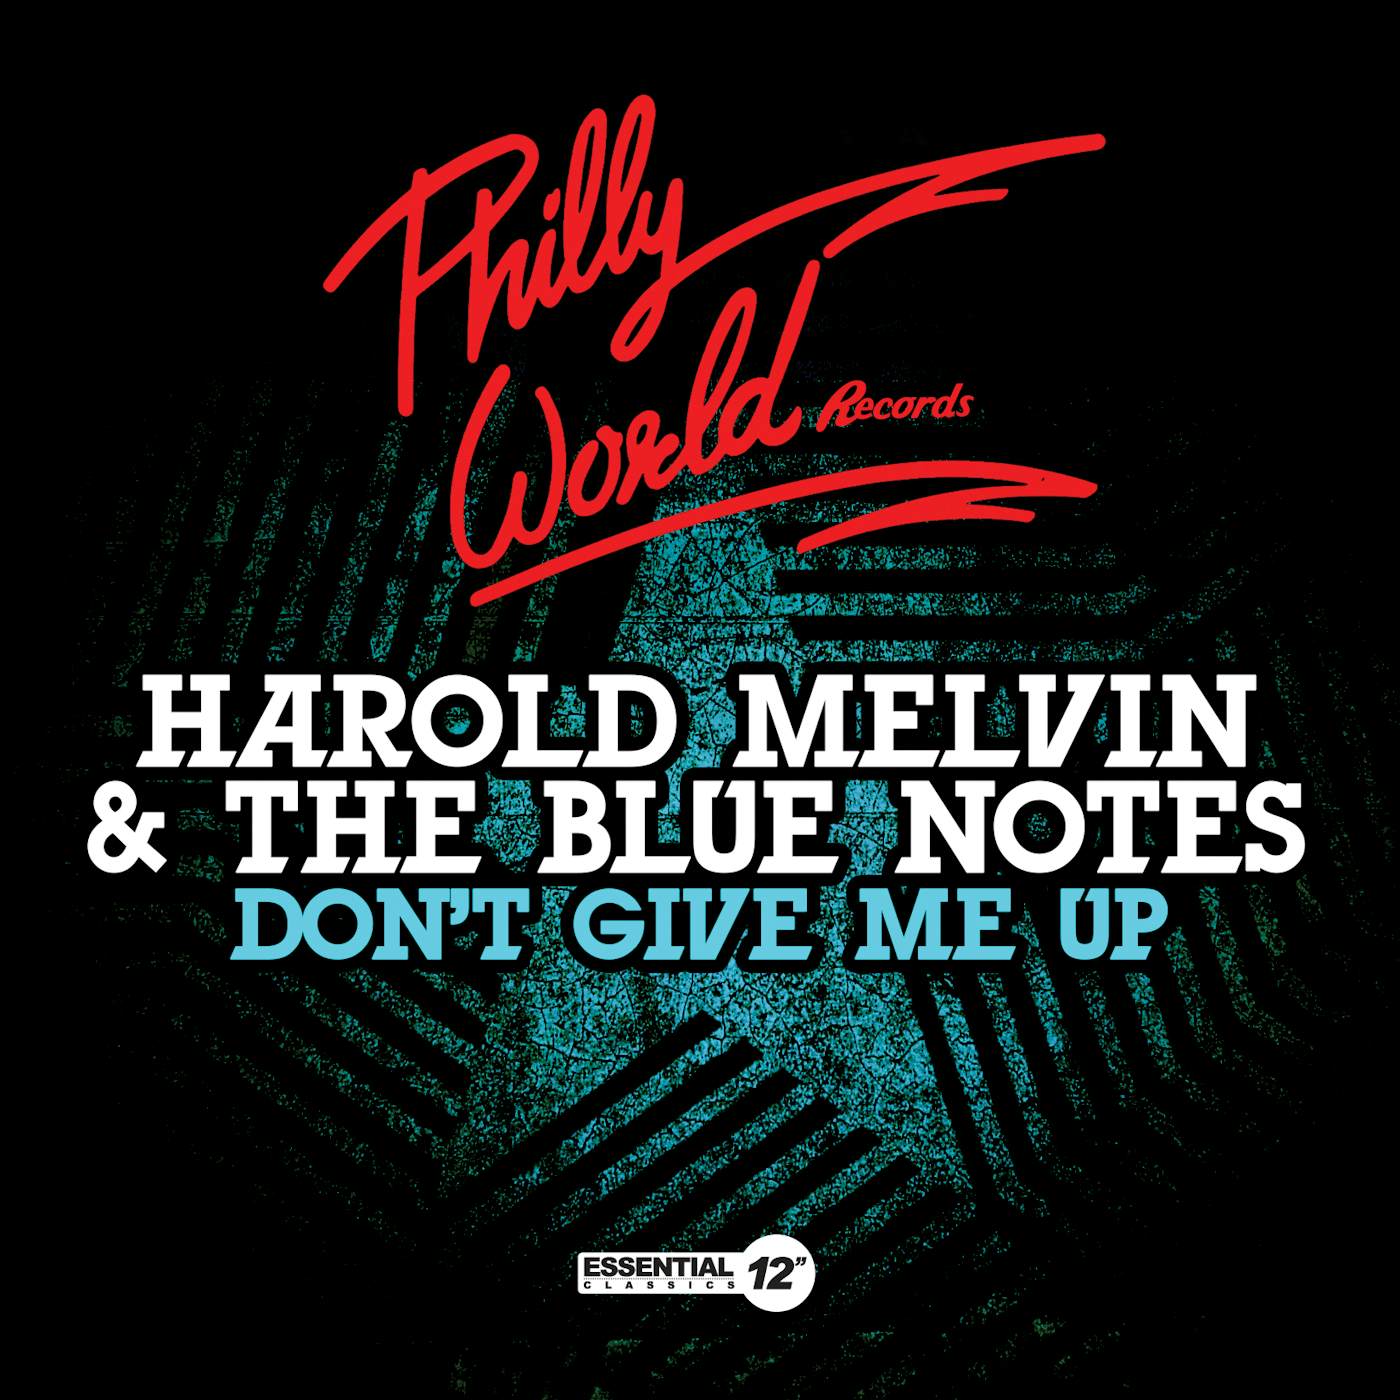 Harold Melvin & The Blue Notes DON'T GIVE ME UP CD